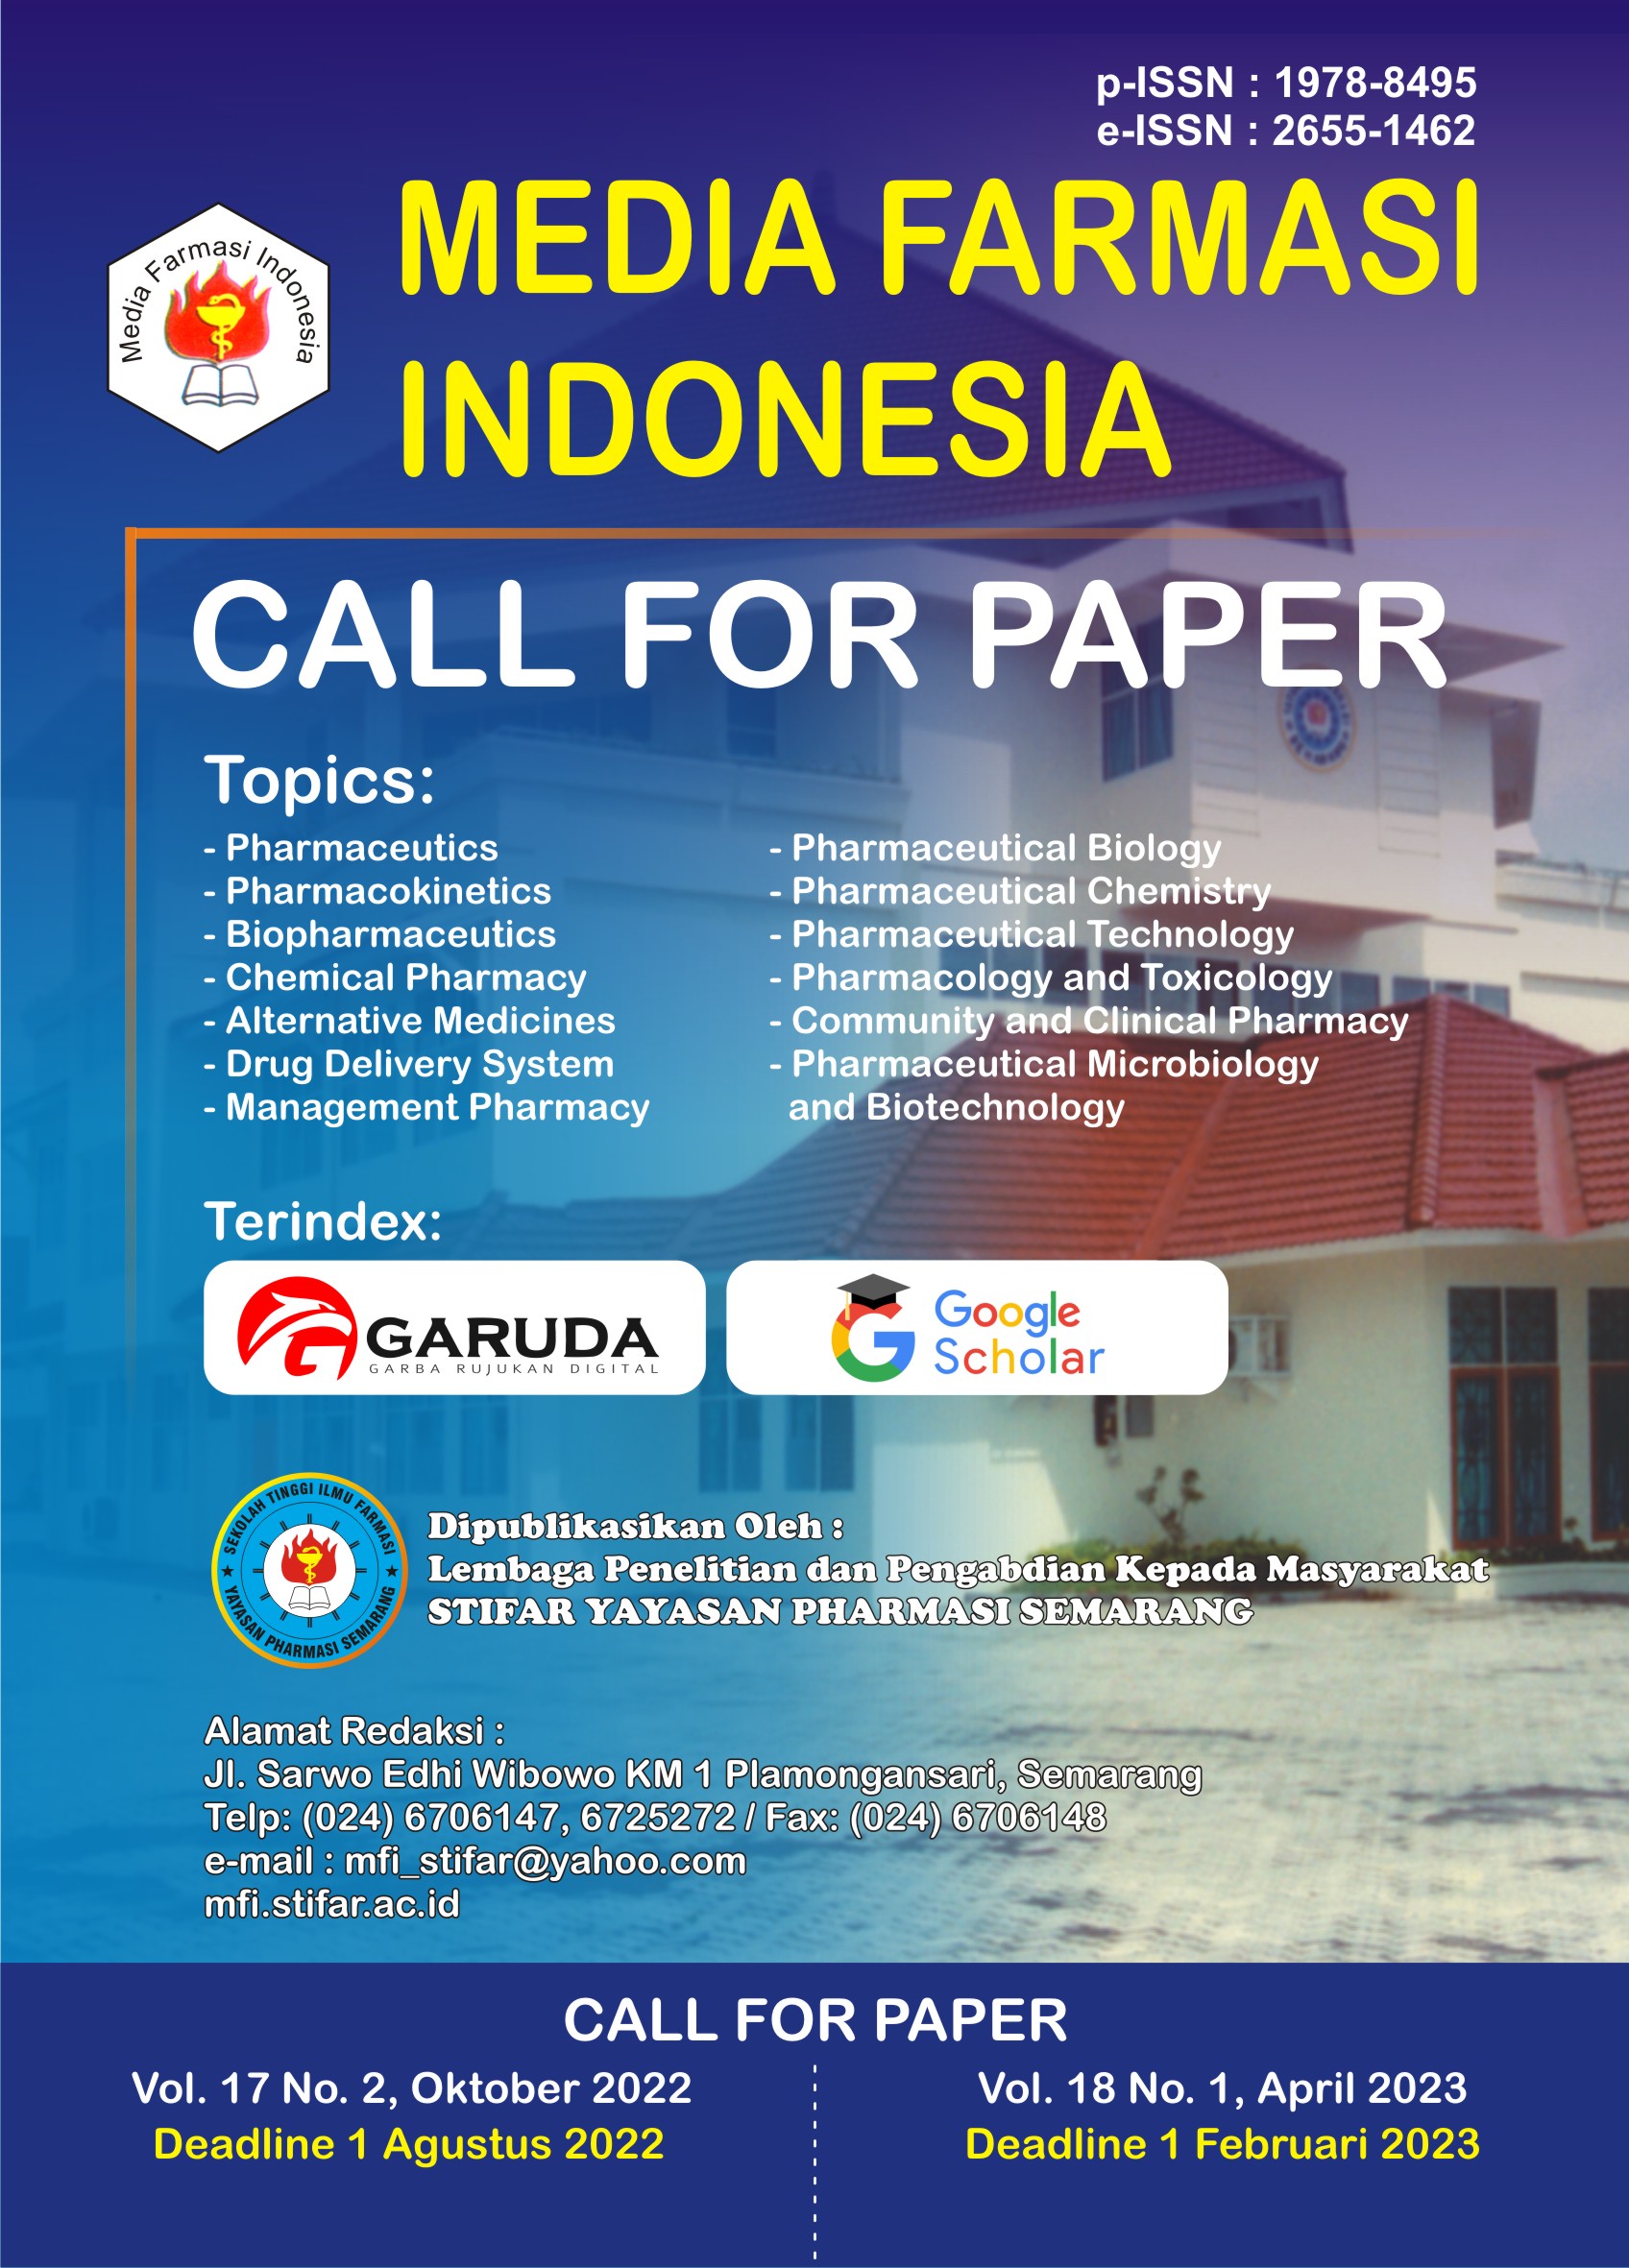 call_for_paper_mfi_2022.jpg